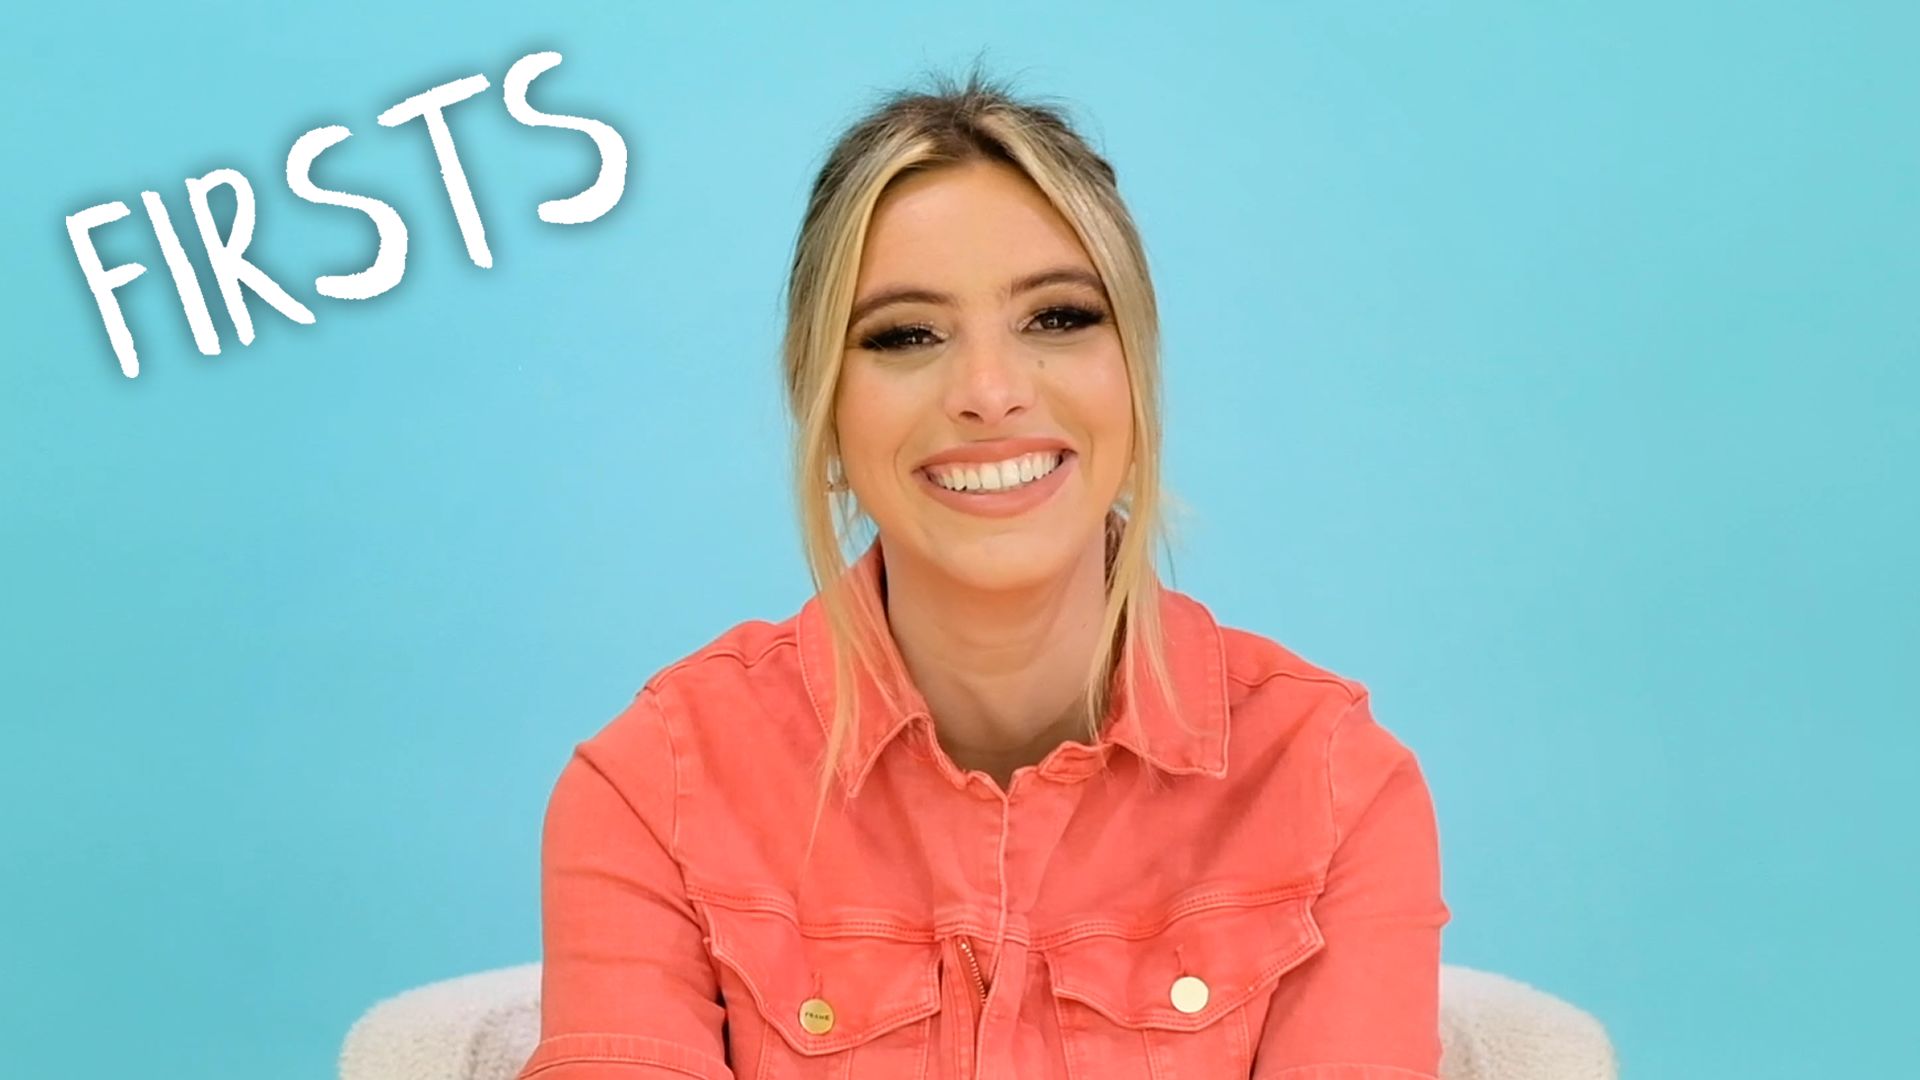 Lele Pons Having Sex - Watch Lele Pons Shares Her First Crush, YouTube Video & More | Firsts |  Teen Vogue